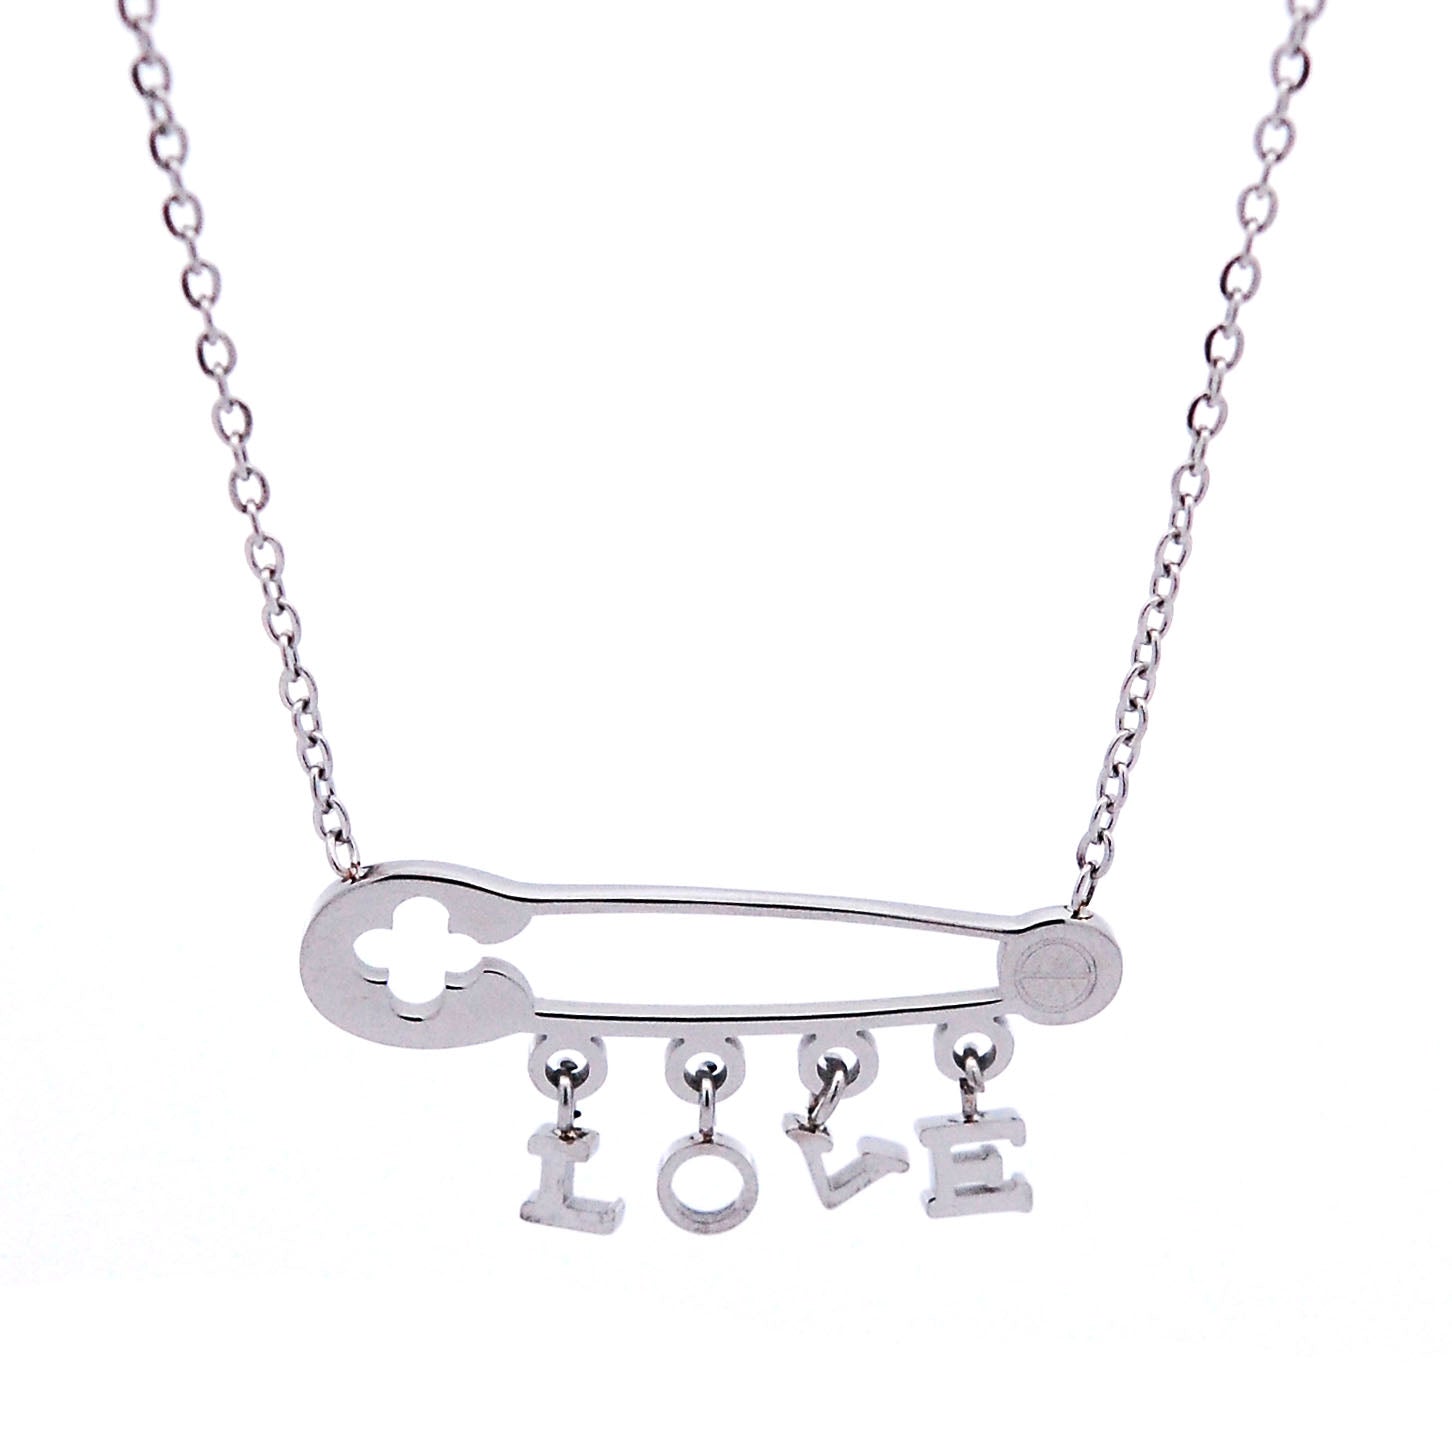 ESN 7660: "Pin Me In Love" Safety Necklace